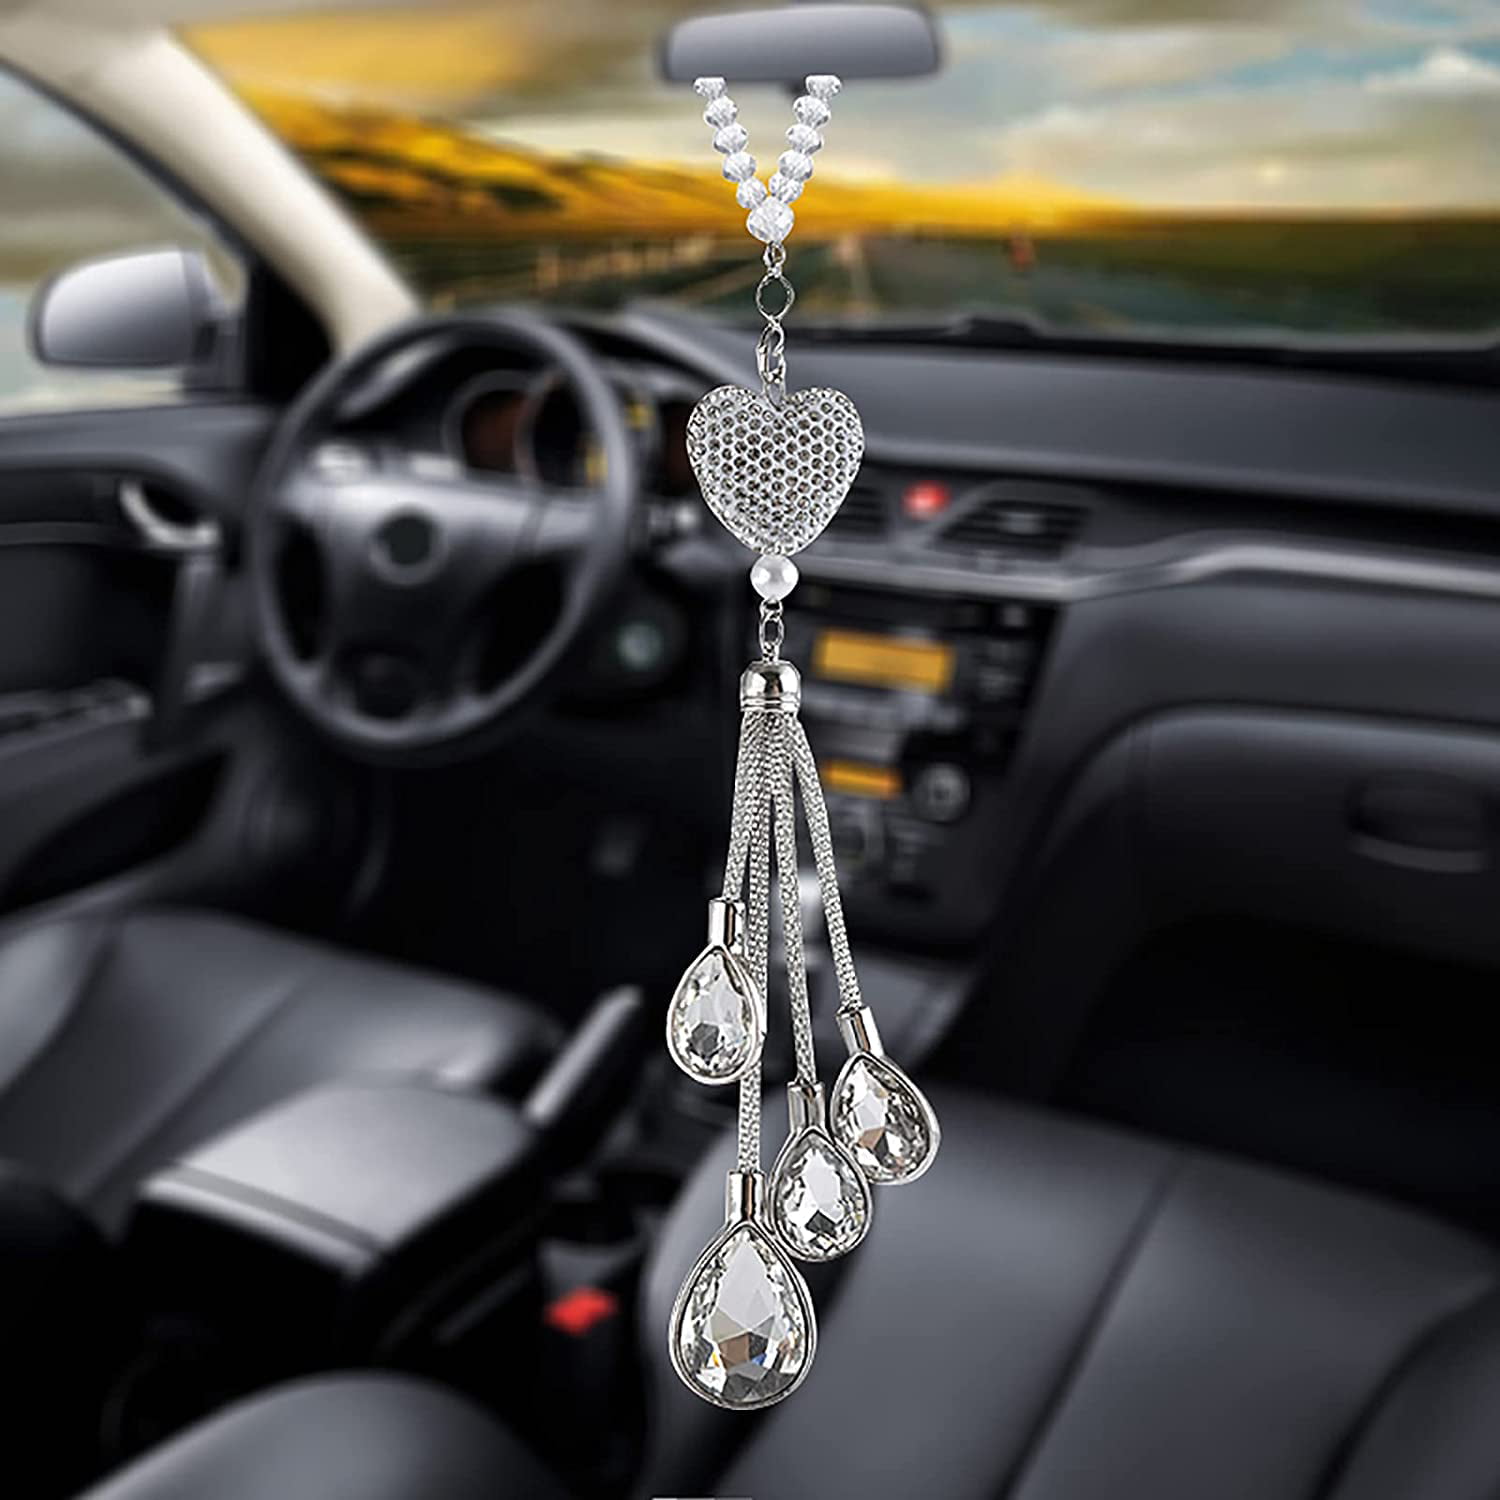 Car Pendant Hanging Crystal with Diamond Pearl Pendant Car Decoration Charm Christmas Tree Interior Accessories for Auto Rear View Mirror,A 